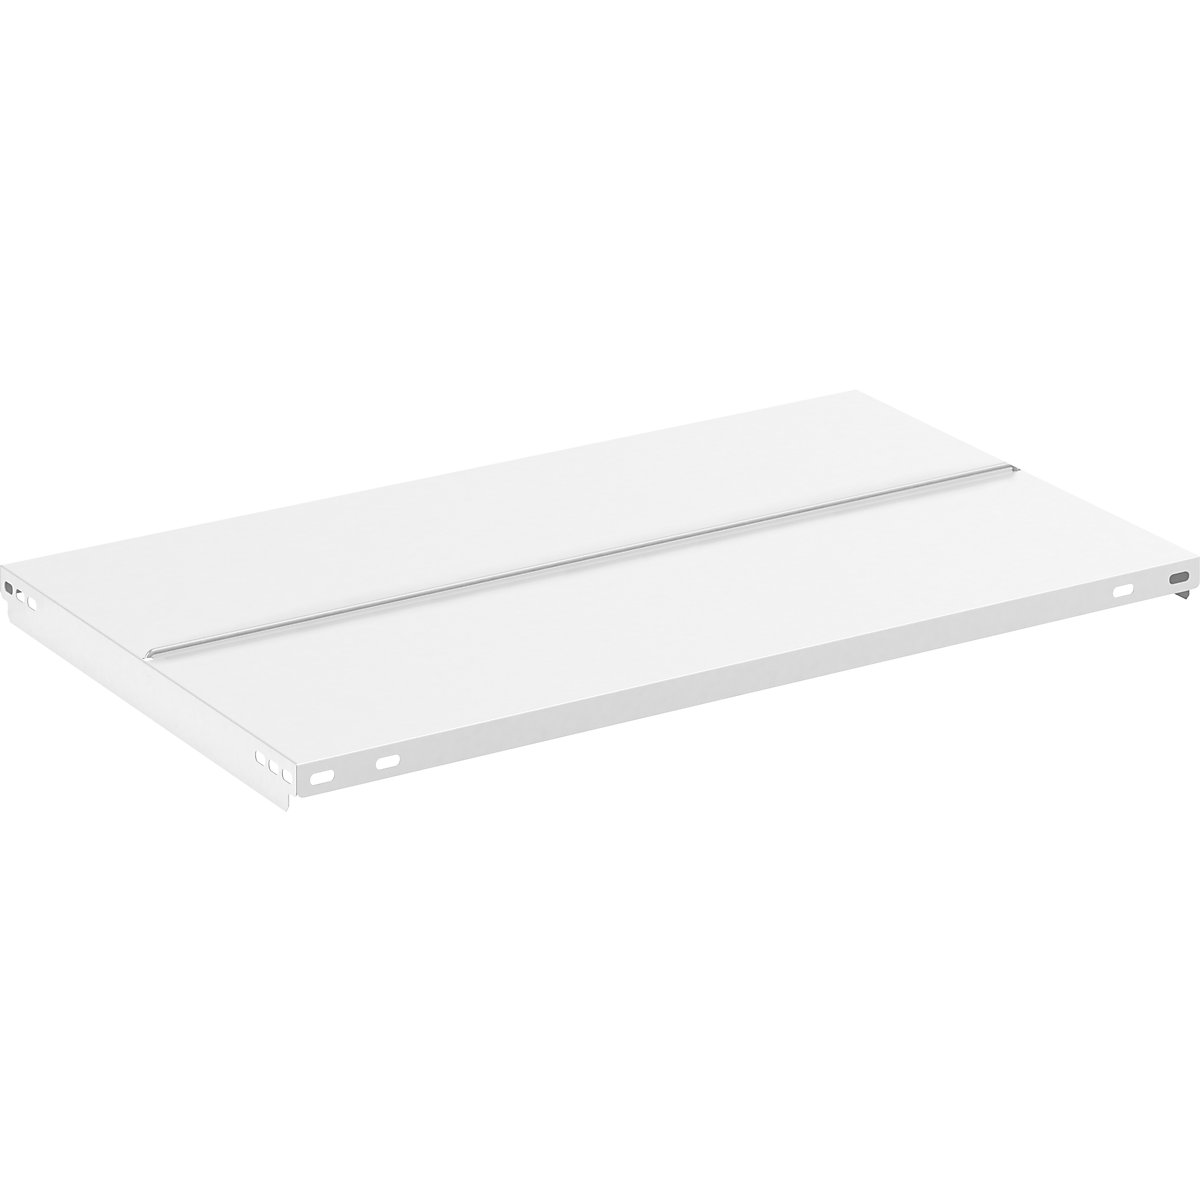 Shelf with supports – hofe, zinc plated and plastic coated, WxD 750 x 600 mm